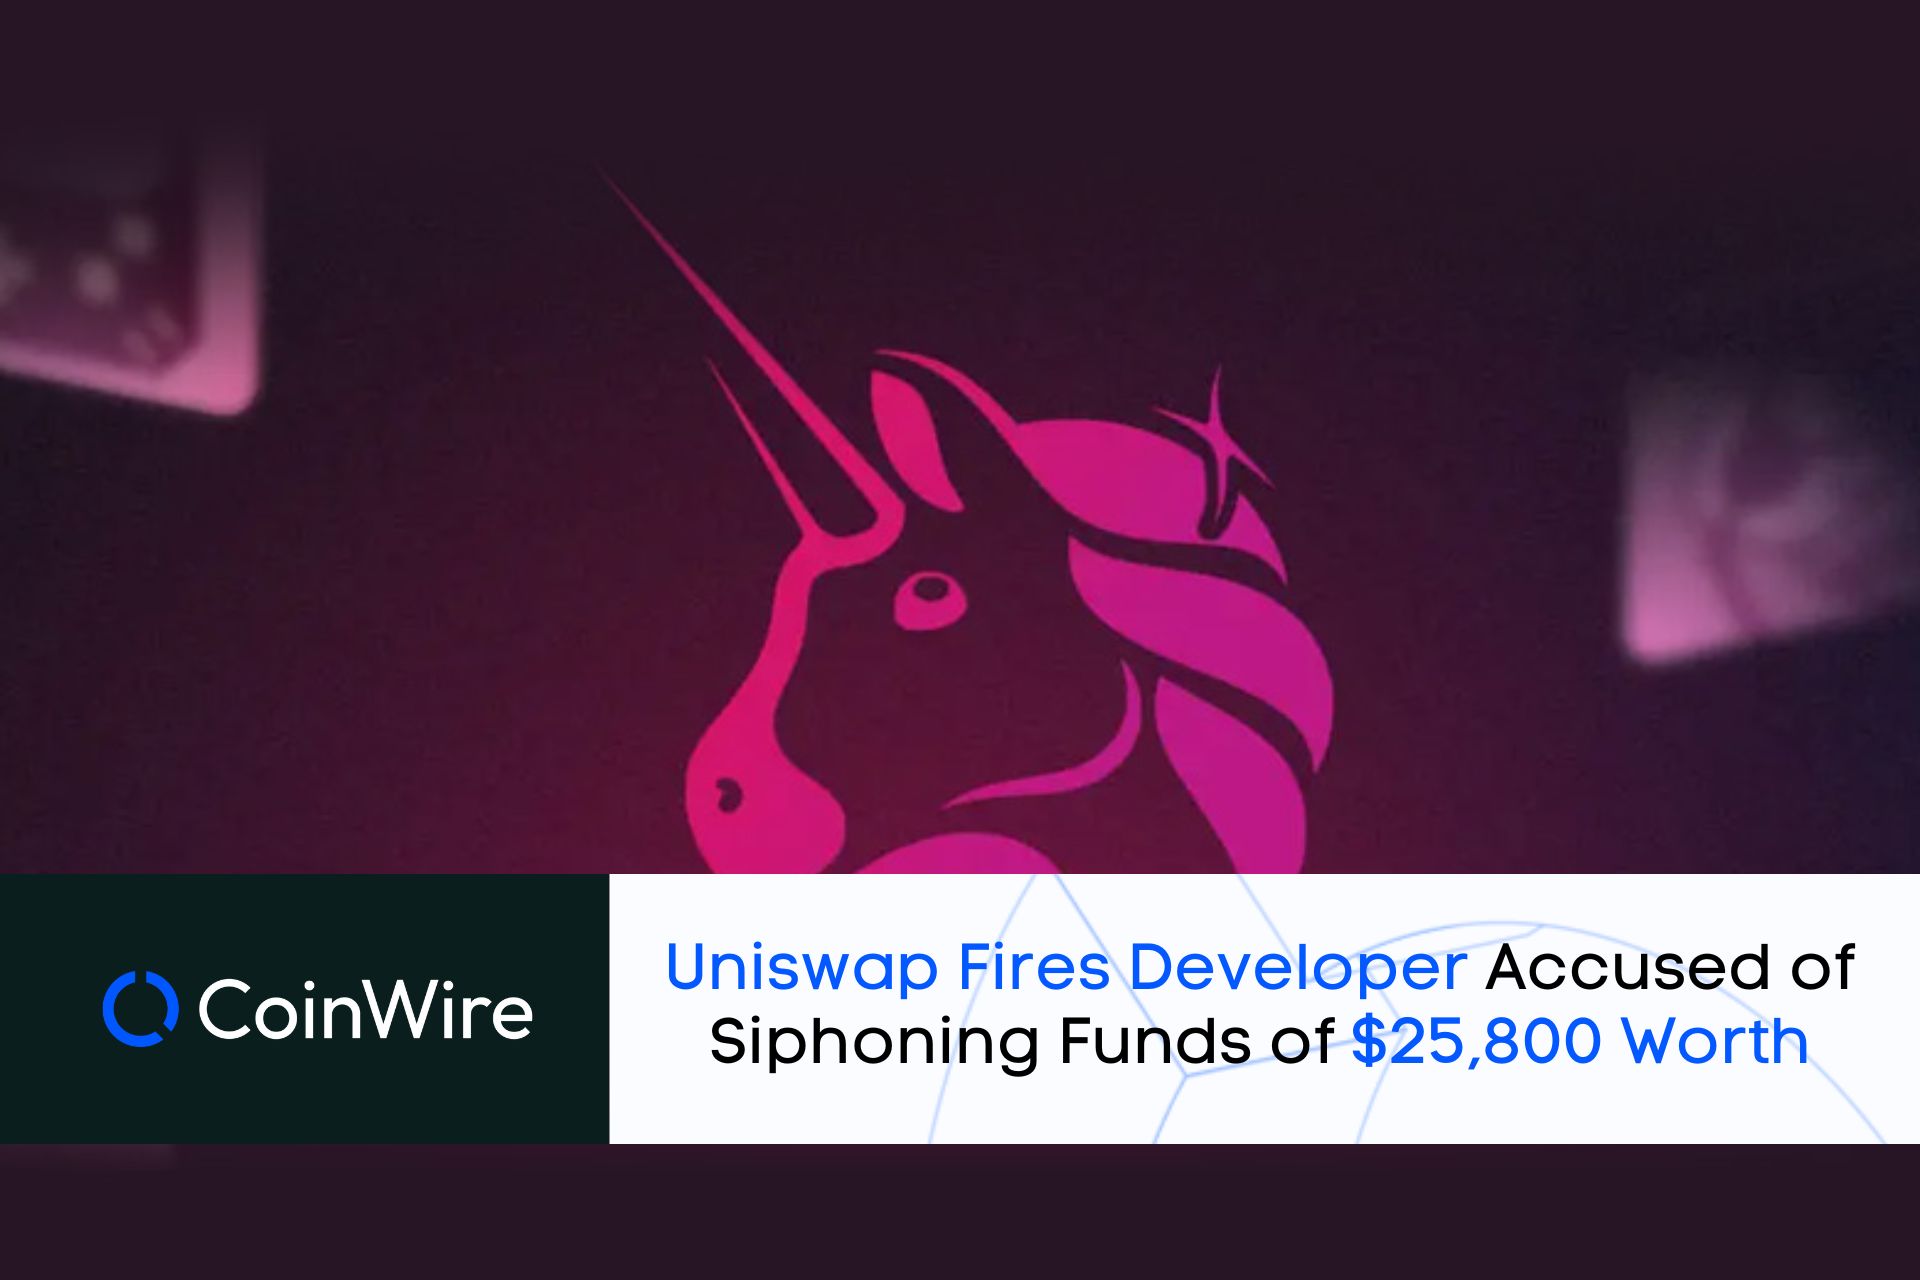 Uniswap Fires Developer Accused Of Siphoning Funds Of $25,800 Worth